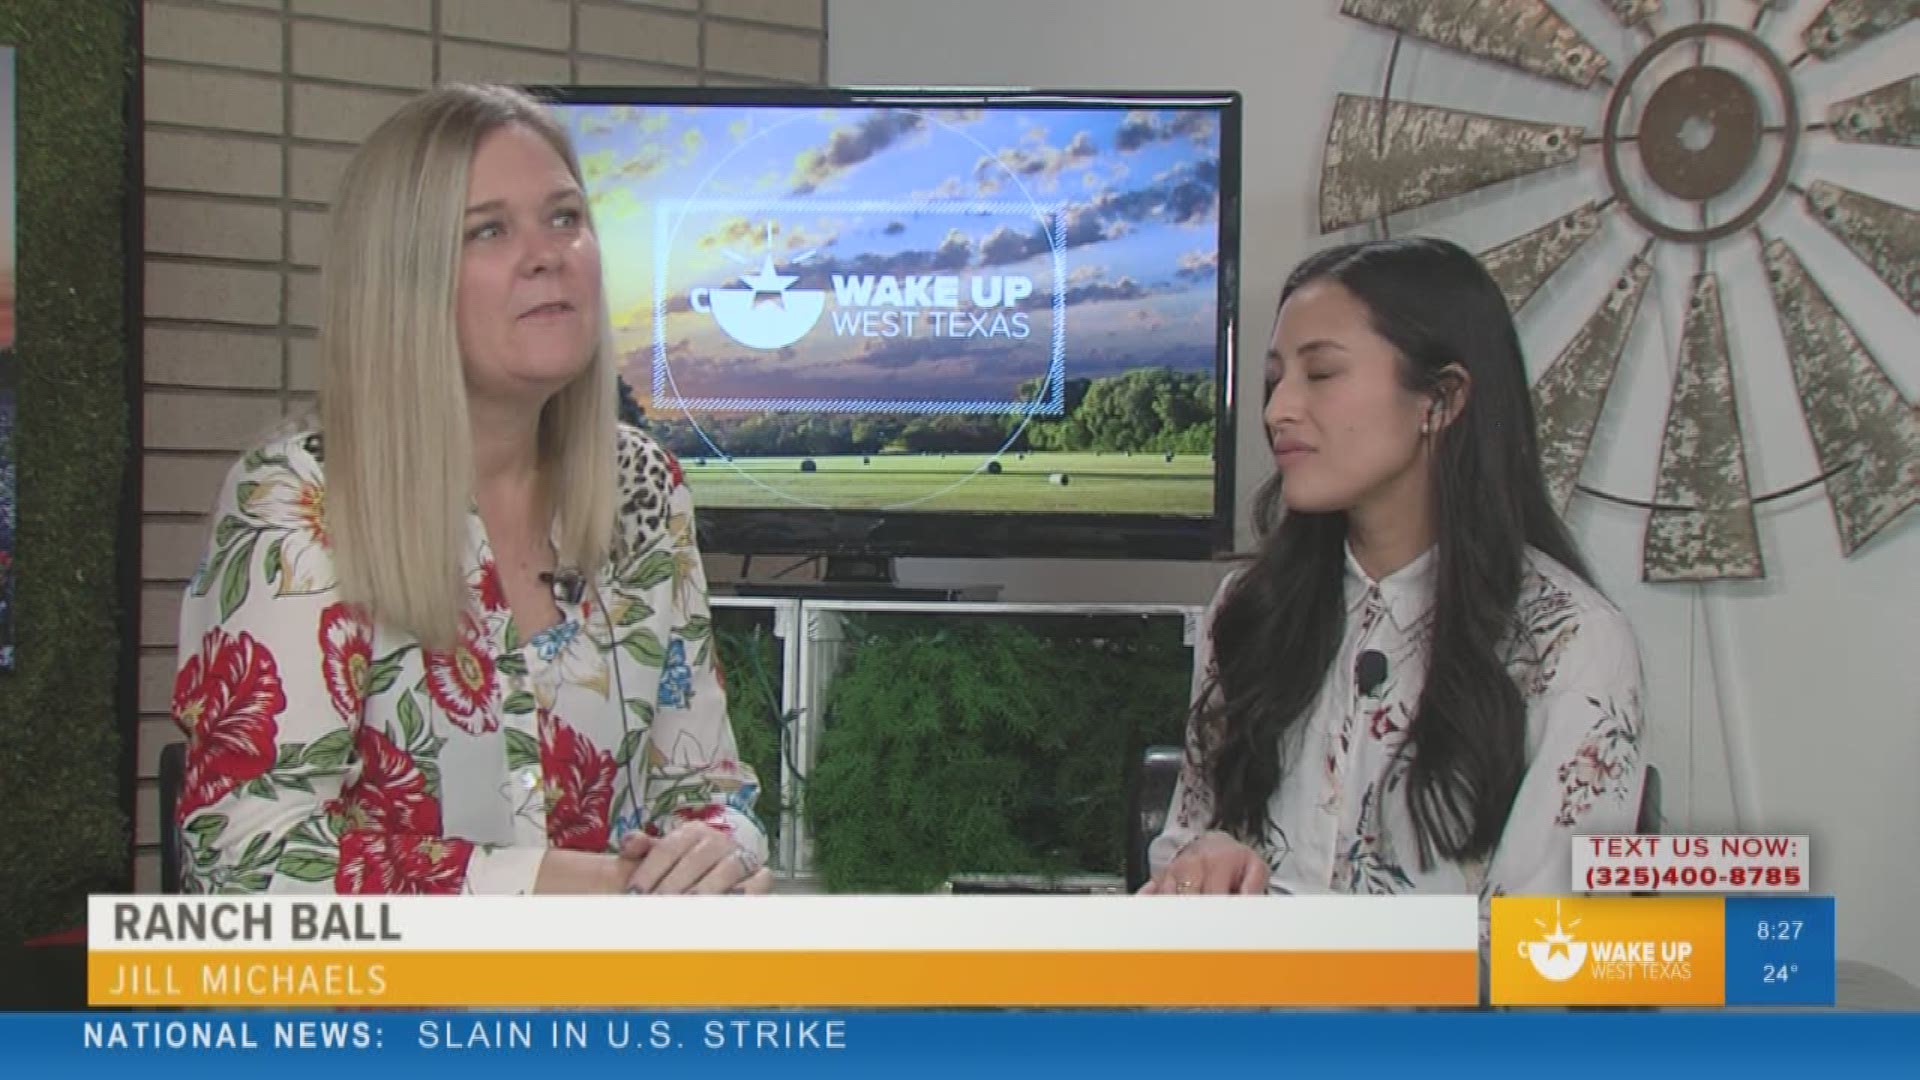 Our Camille Requiestas spoke to Jill Michael's from the West Texas Boys Ranch about the upcoming Ranch Ball auction and where the proceeds go.